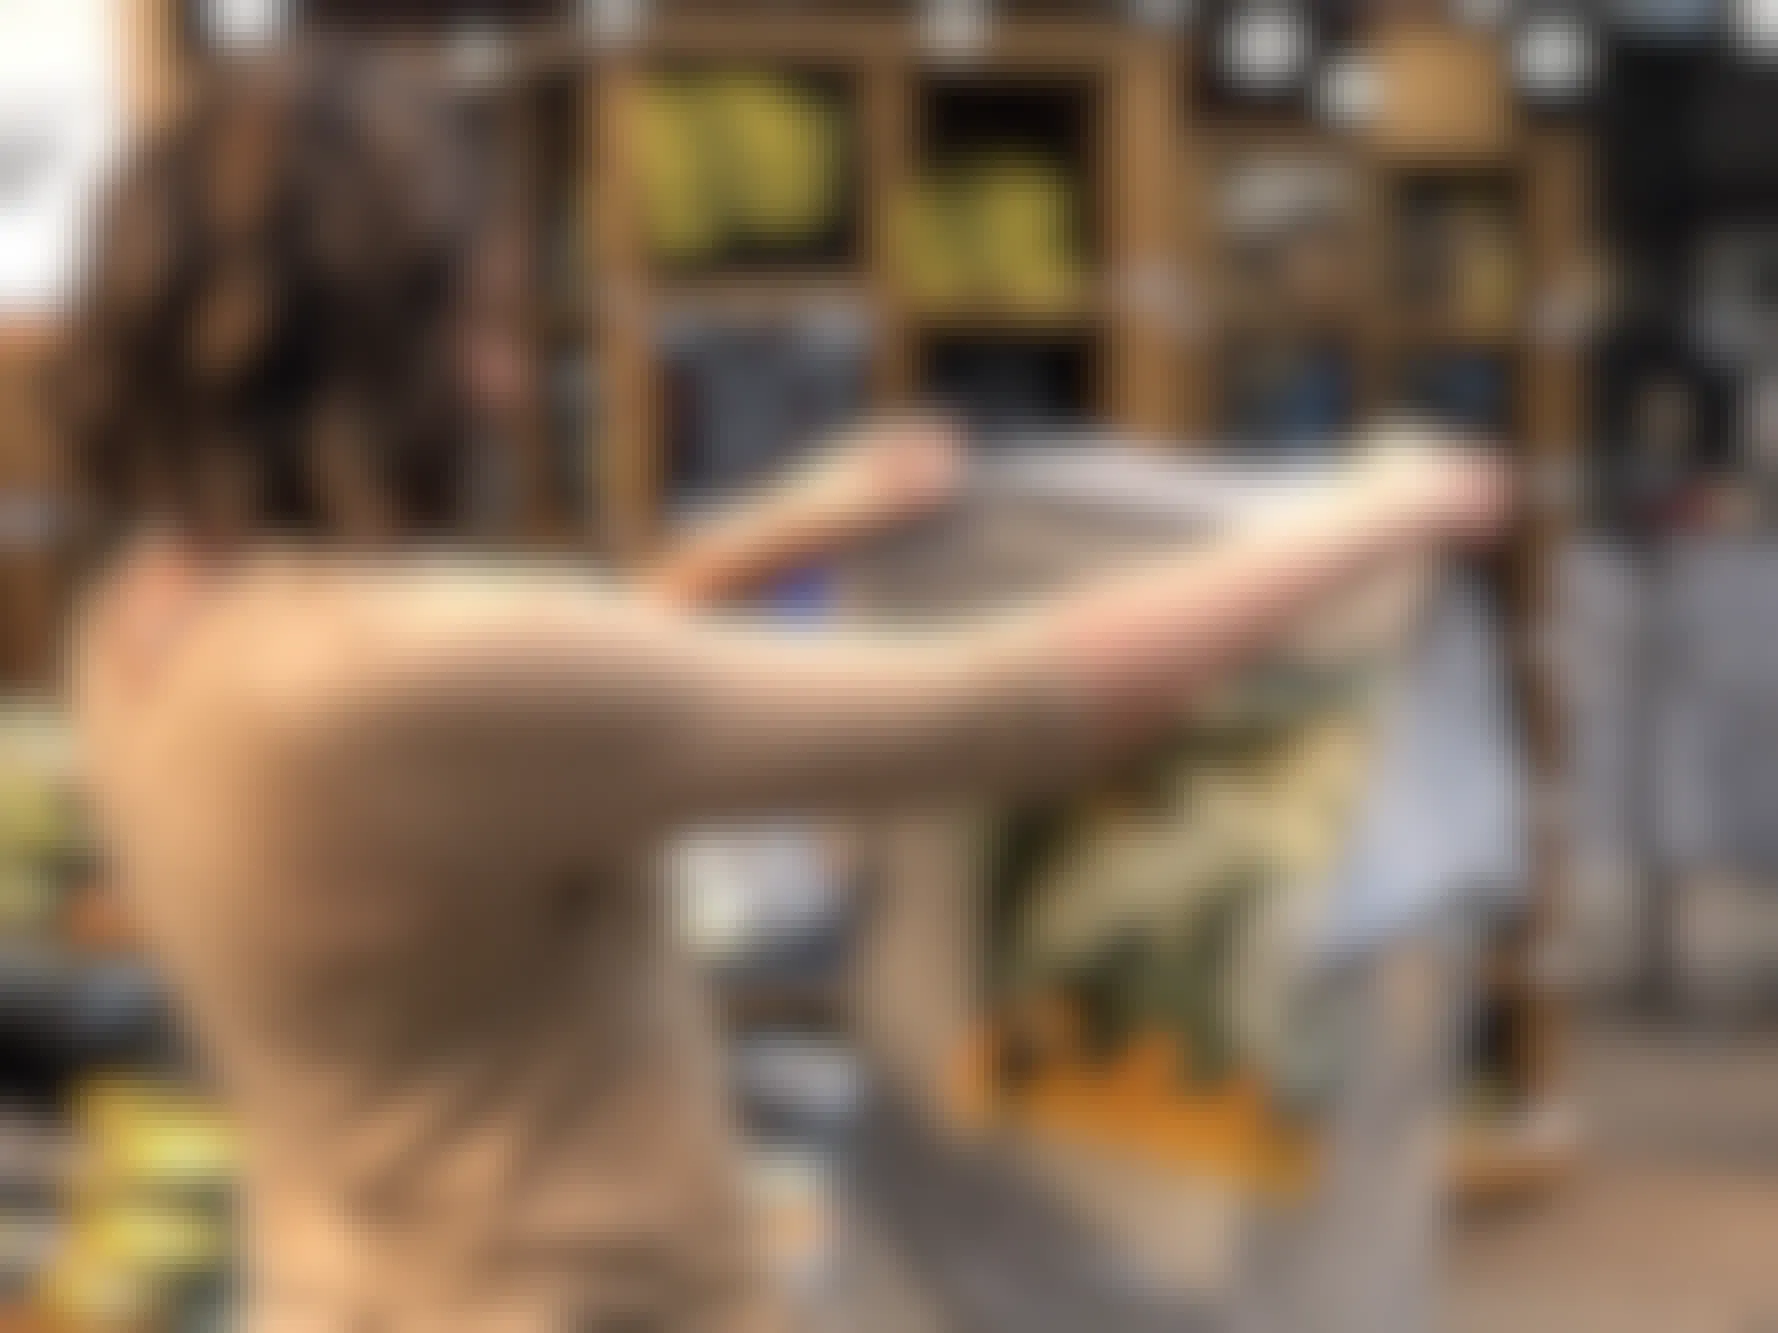 A woman holding up and looking at a Cabela's t-shirt in the clothing section of Cabela's.